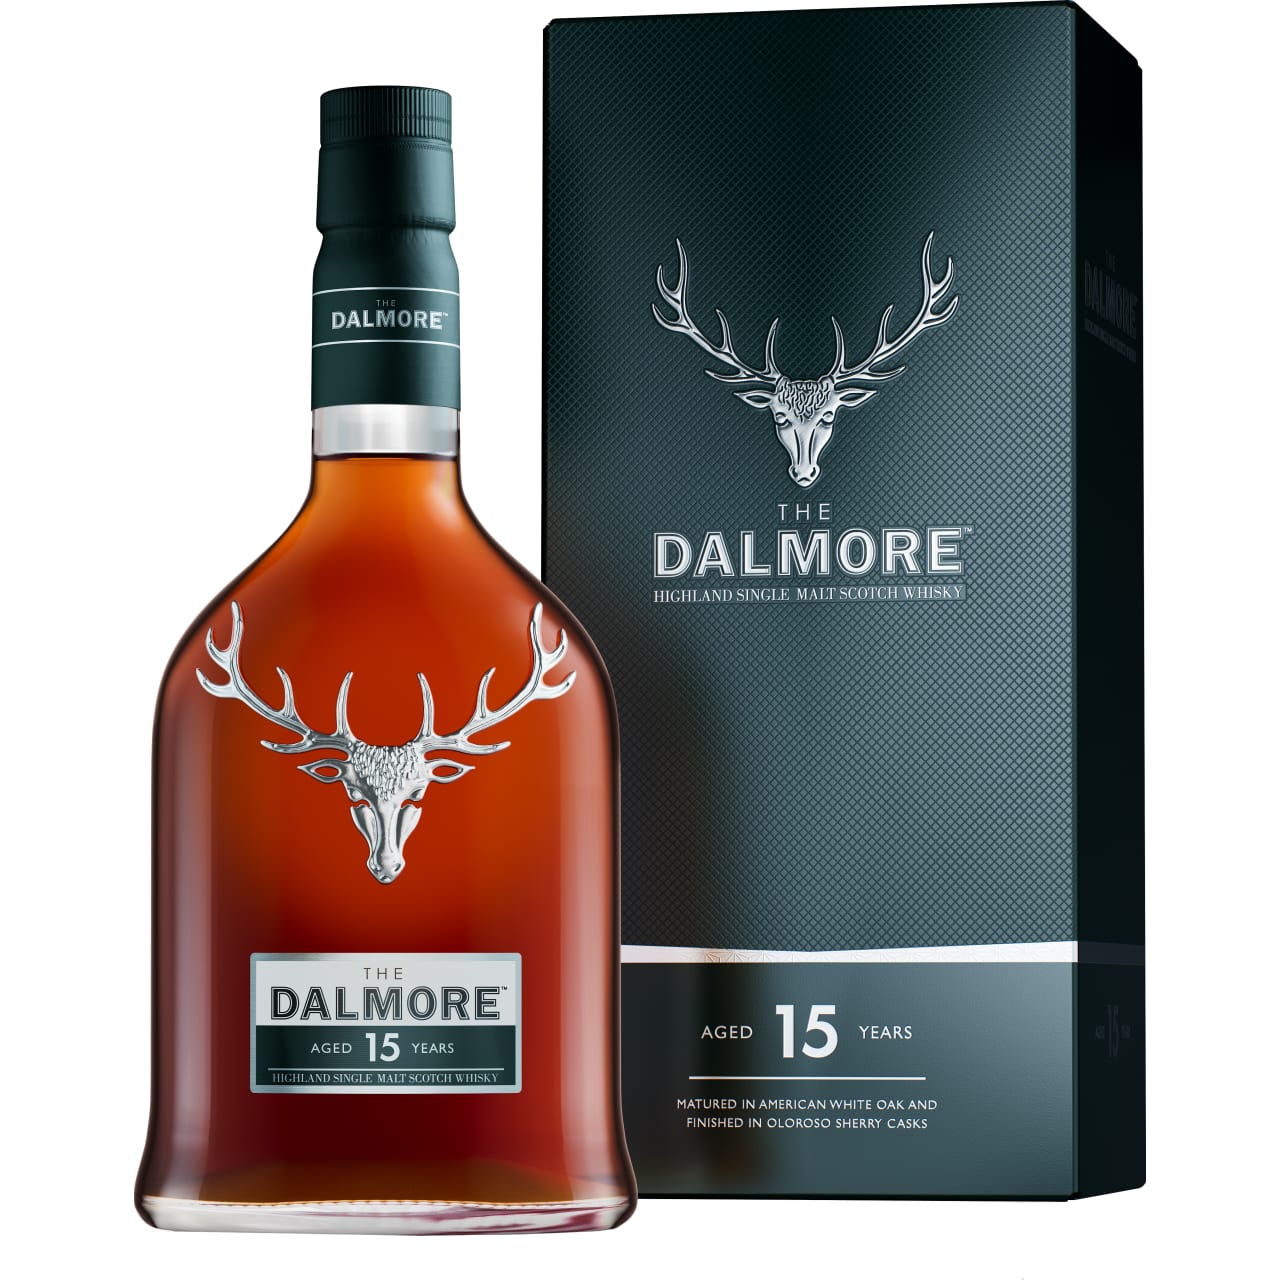 This is a truly delicious 15-year-old malt from Dalmore.